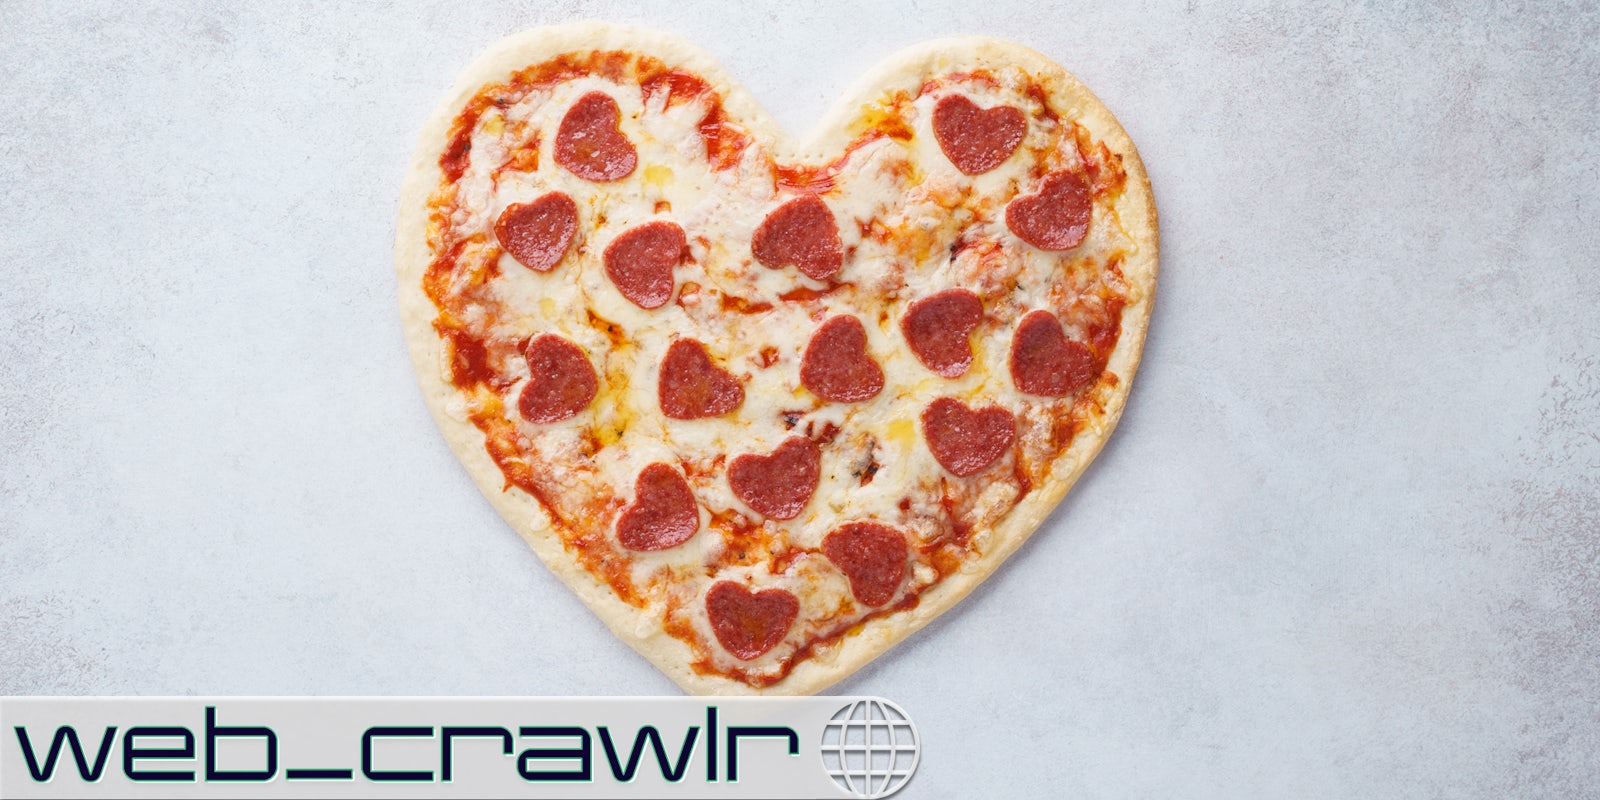 A heart-shaped pizza. The Daily Dot newsletter web_crawlr logo is in the bottom left corner.